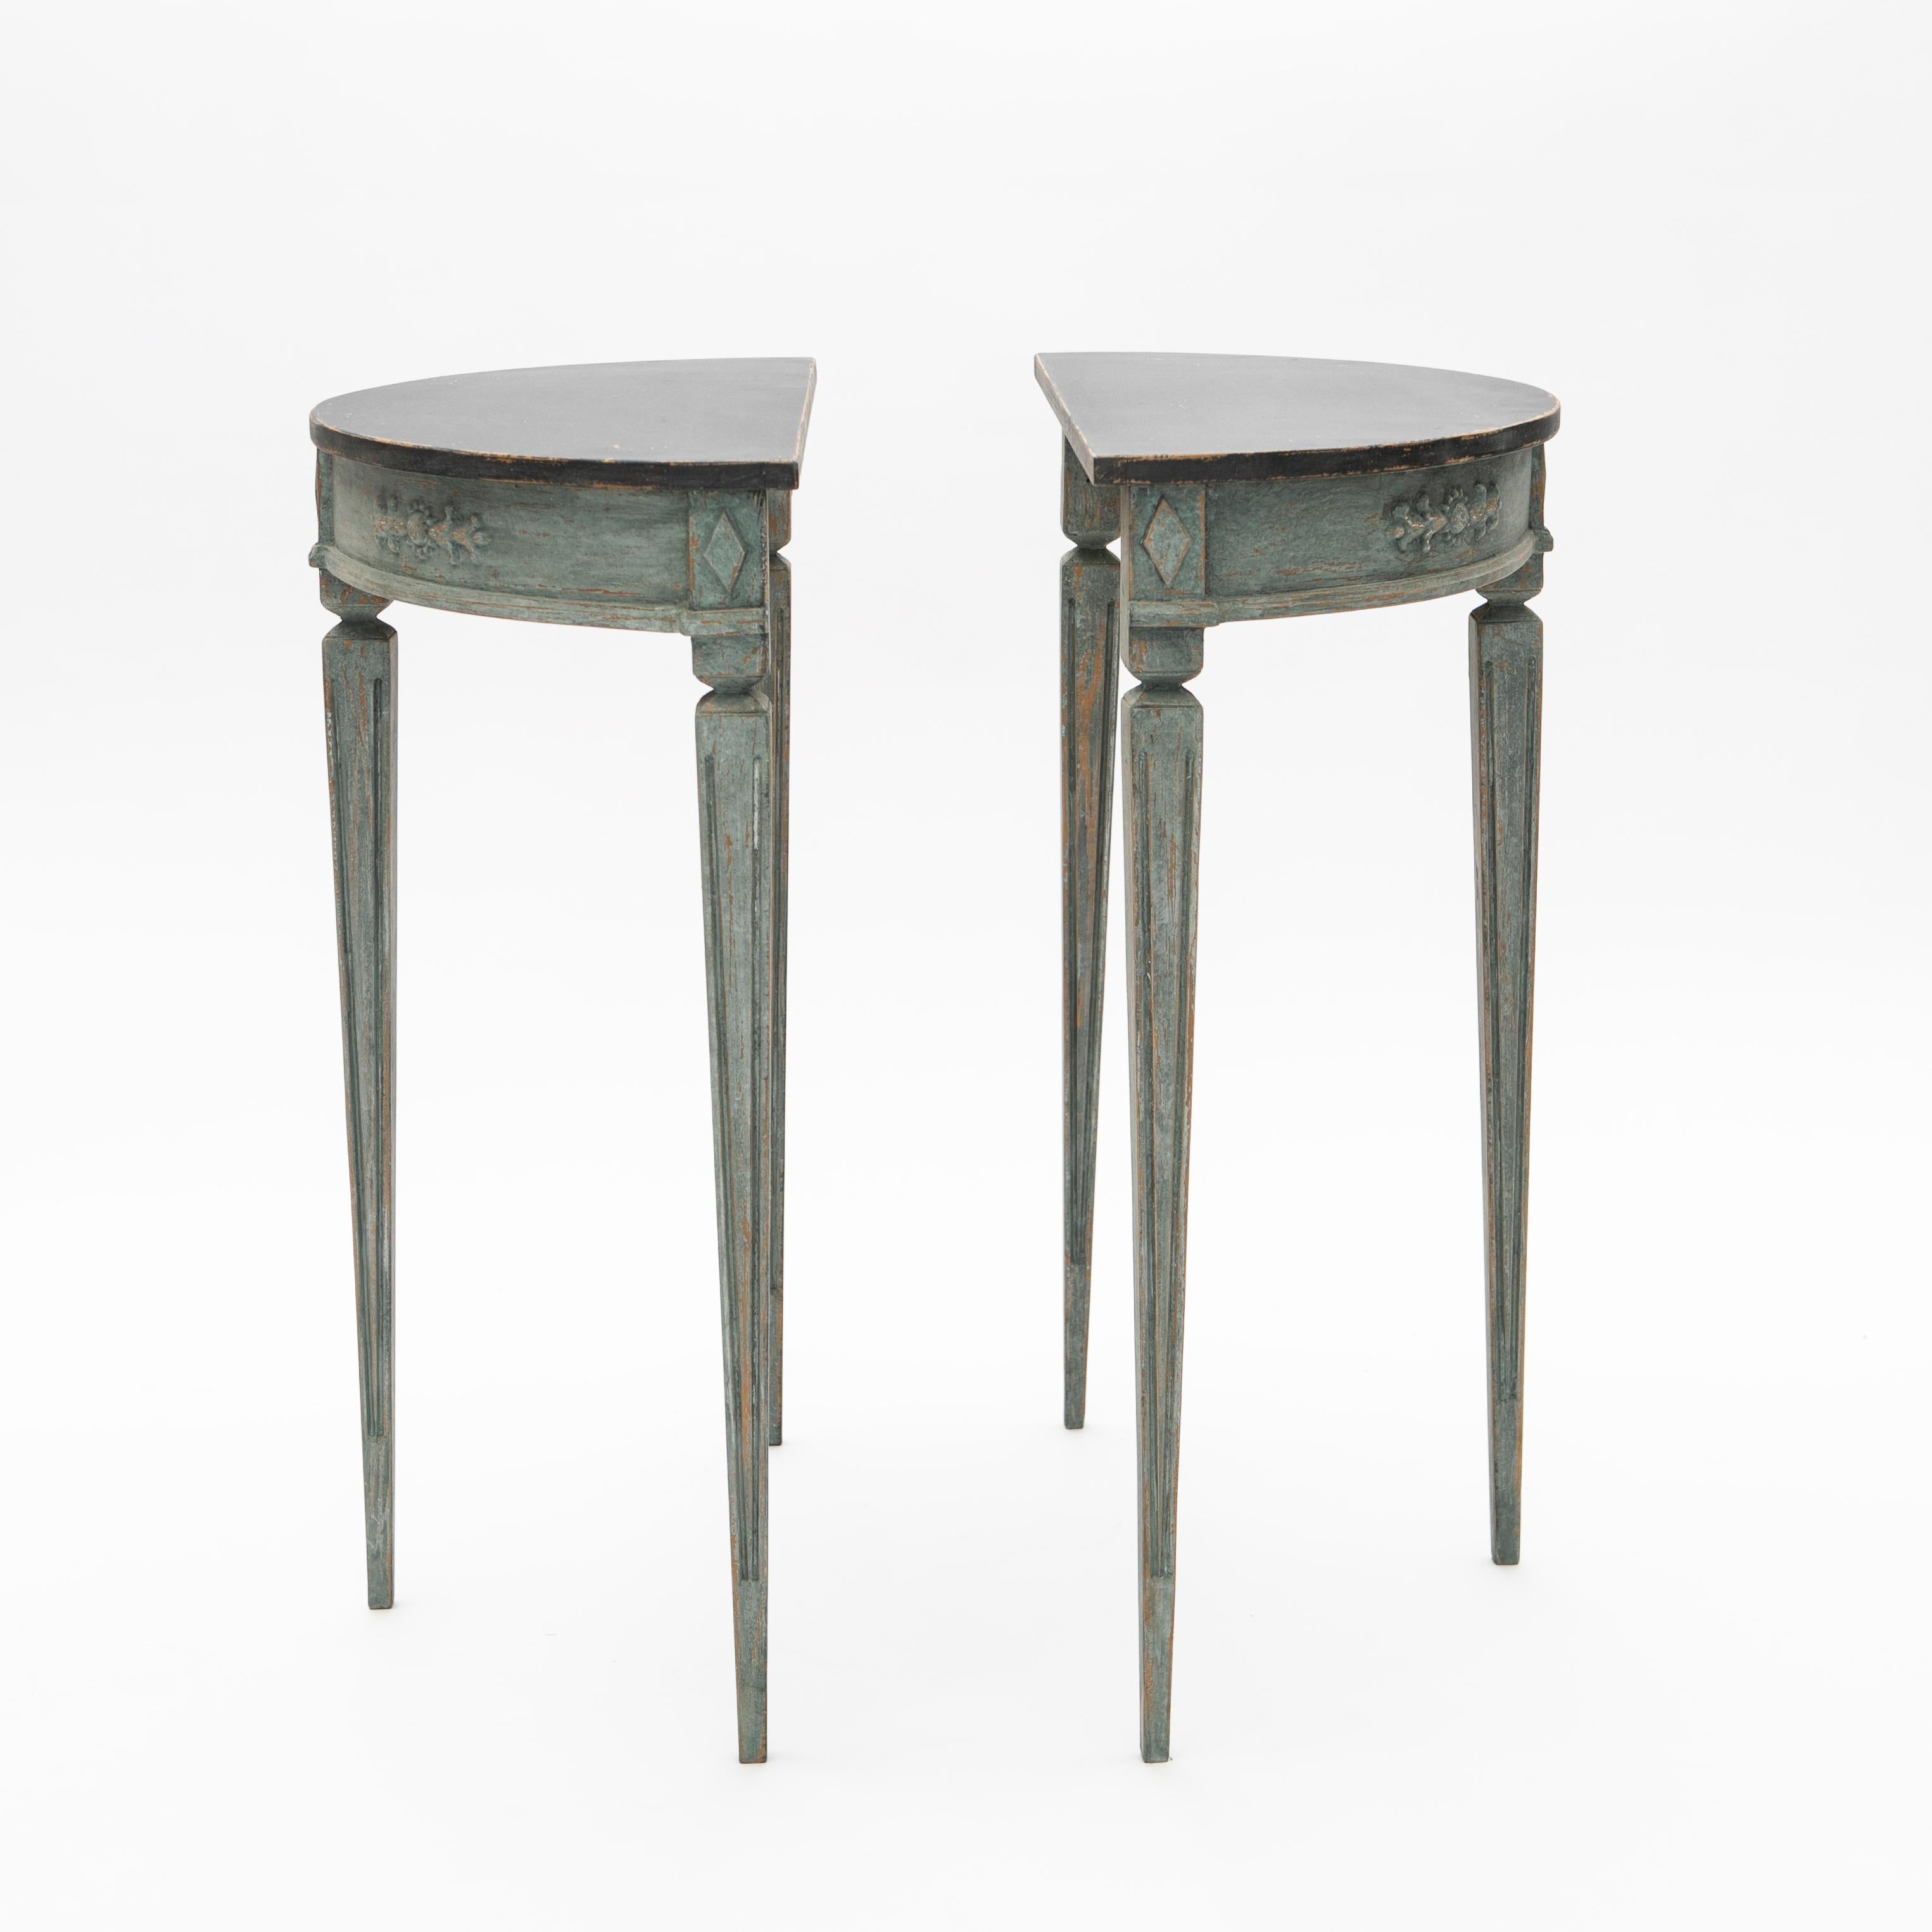 20th Century Pair of Demilune Console Tables, Gustavian Style